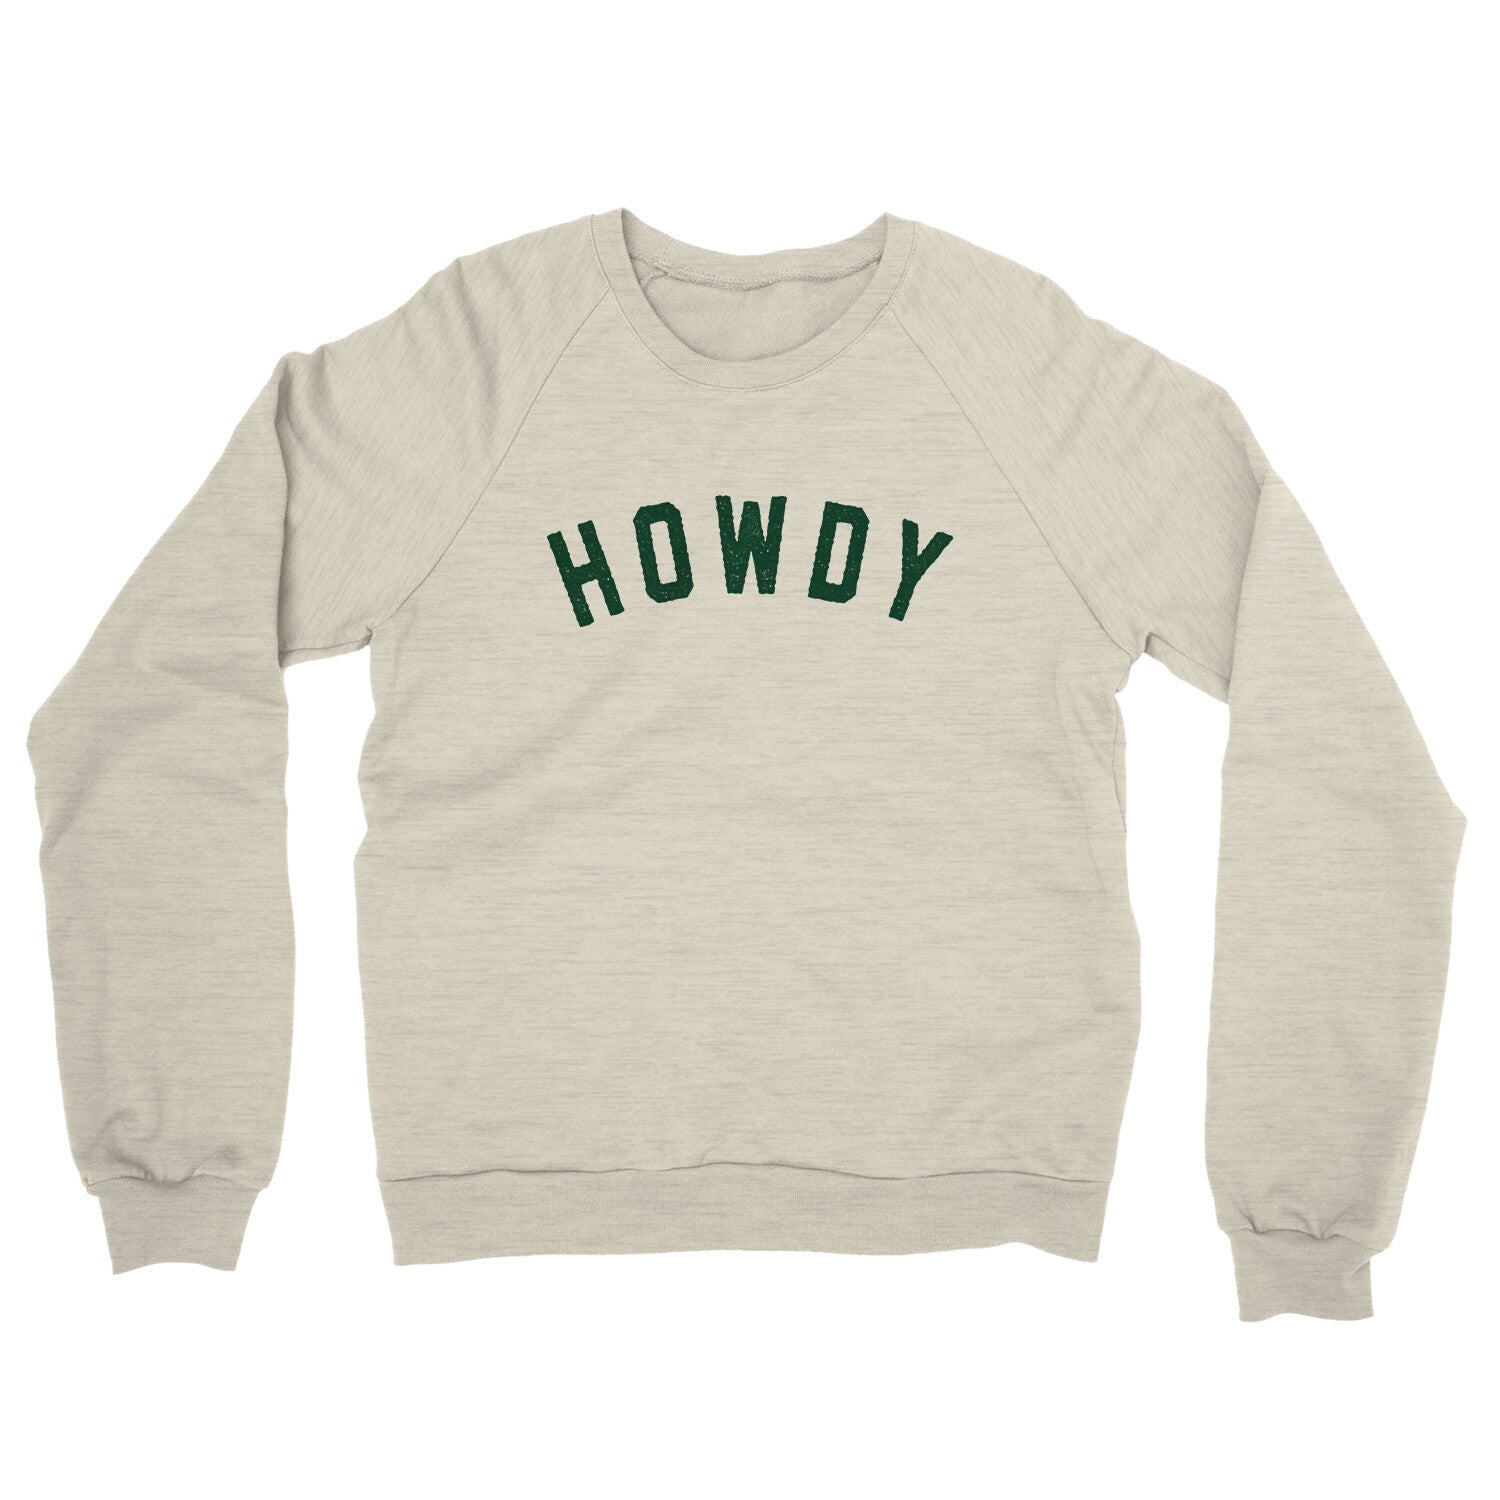 Howdy in Heather Oatmeal Color